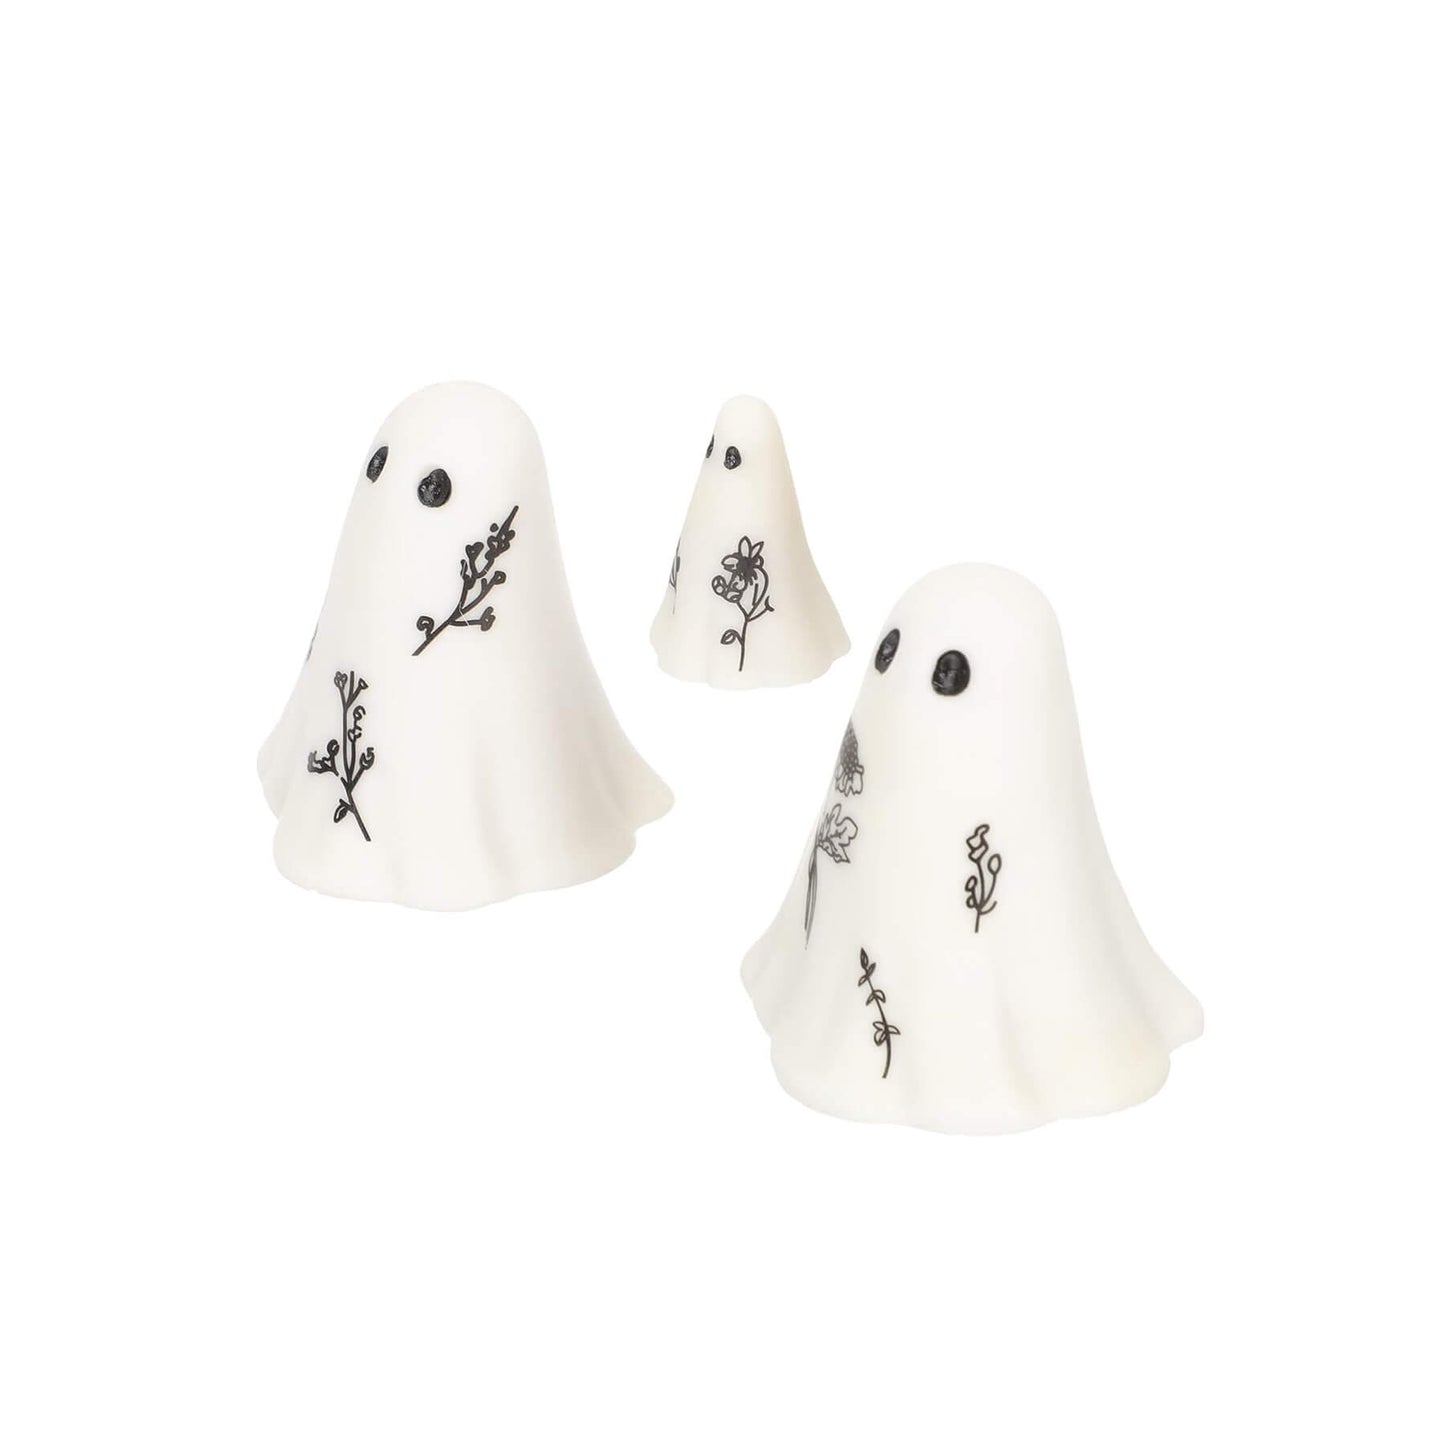 GHOST FAMILY - Spooky Resin Ornaments